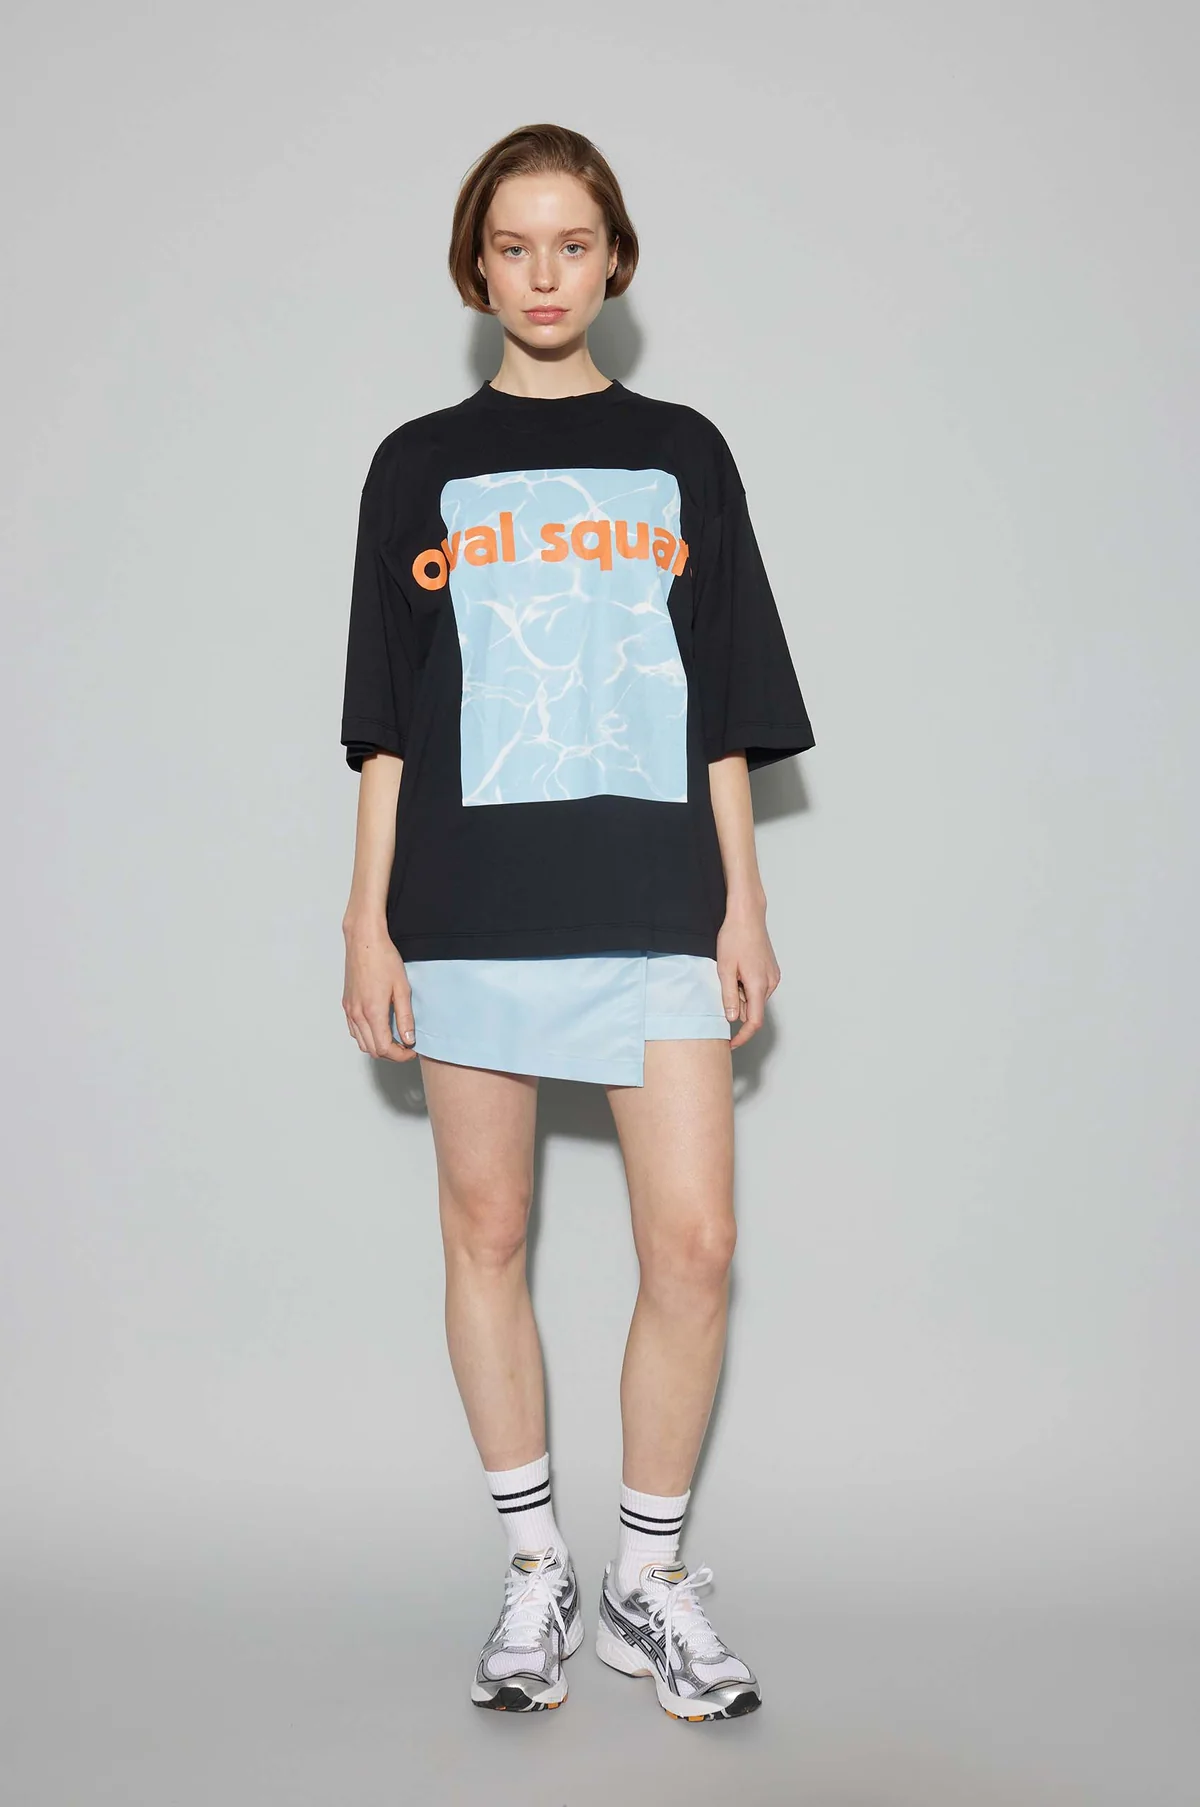 OVAL SQUARE Fluid ss tee